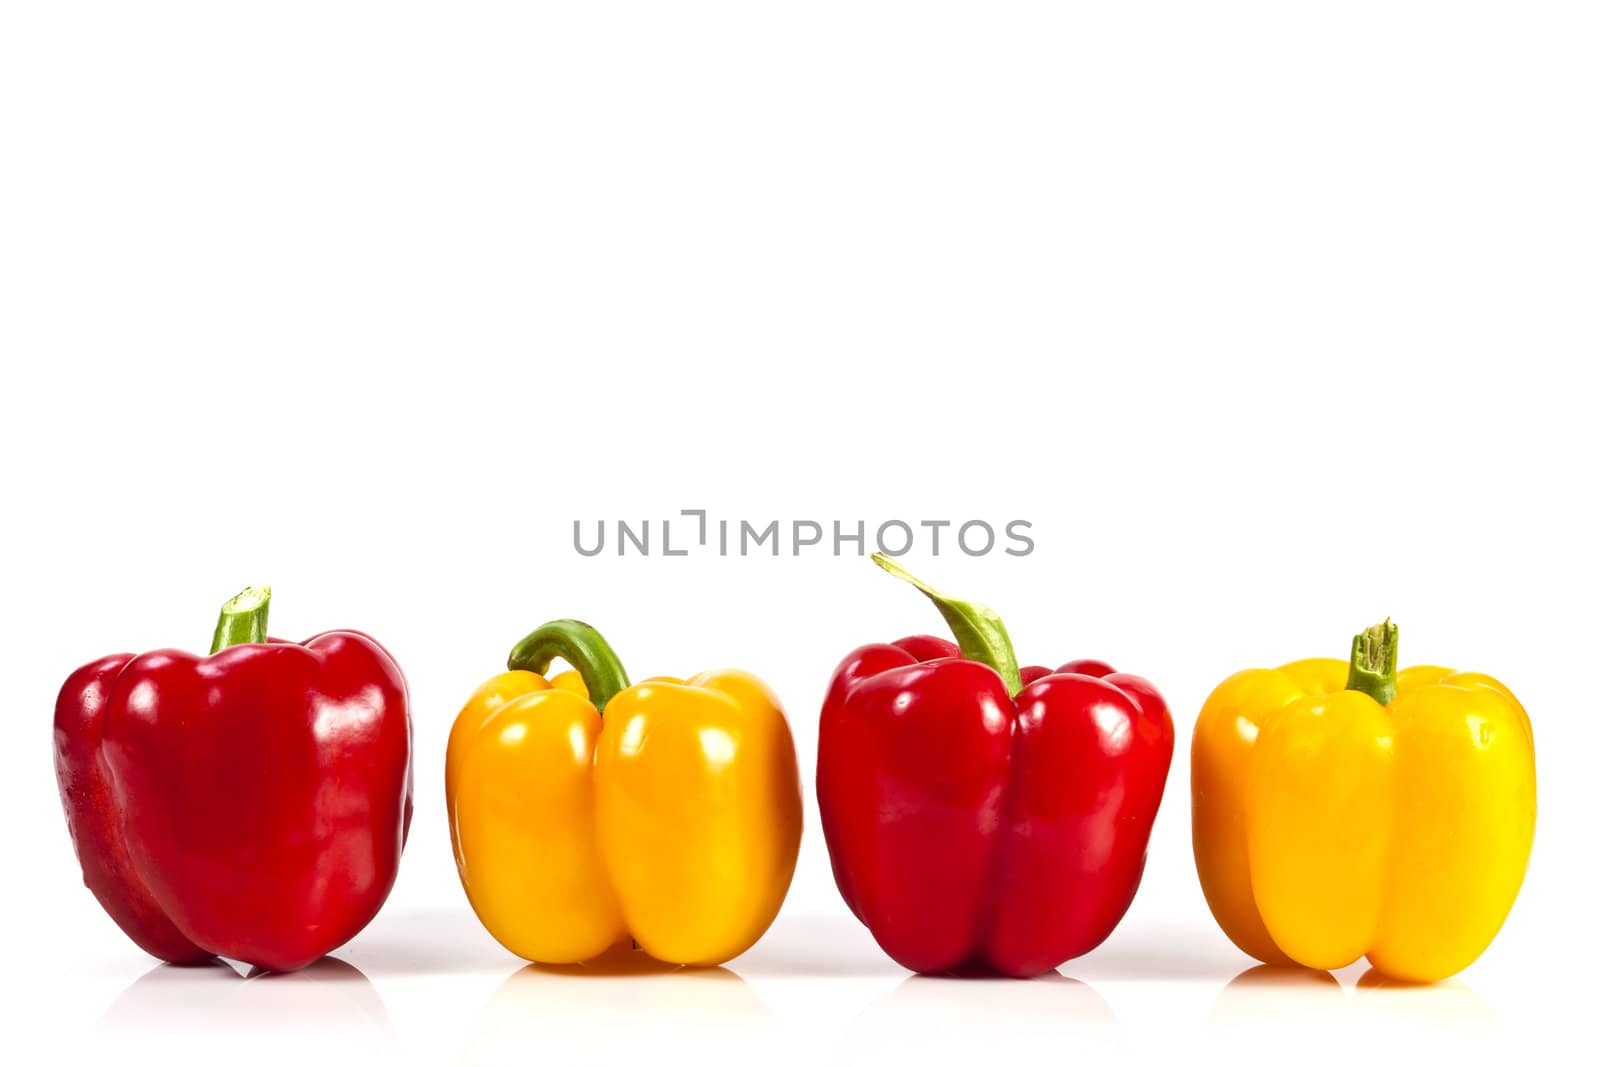 Yellow and red bell pepper on white background with blank text copy space